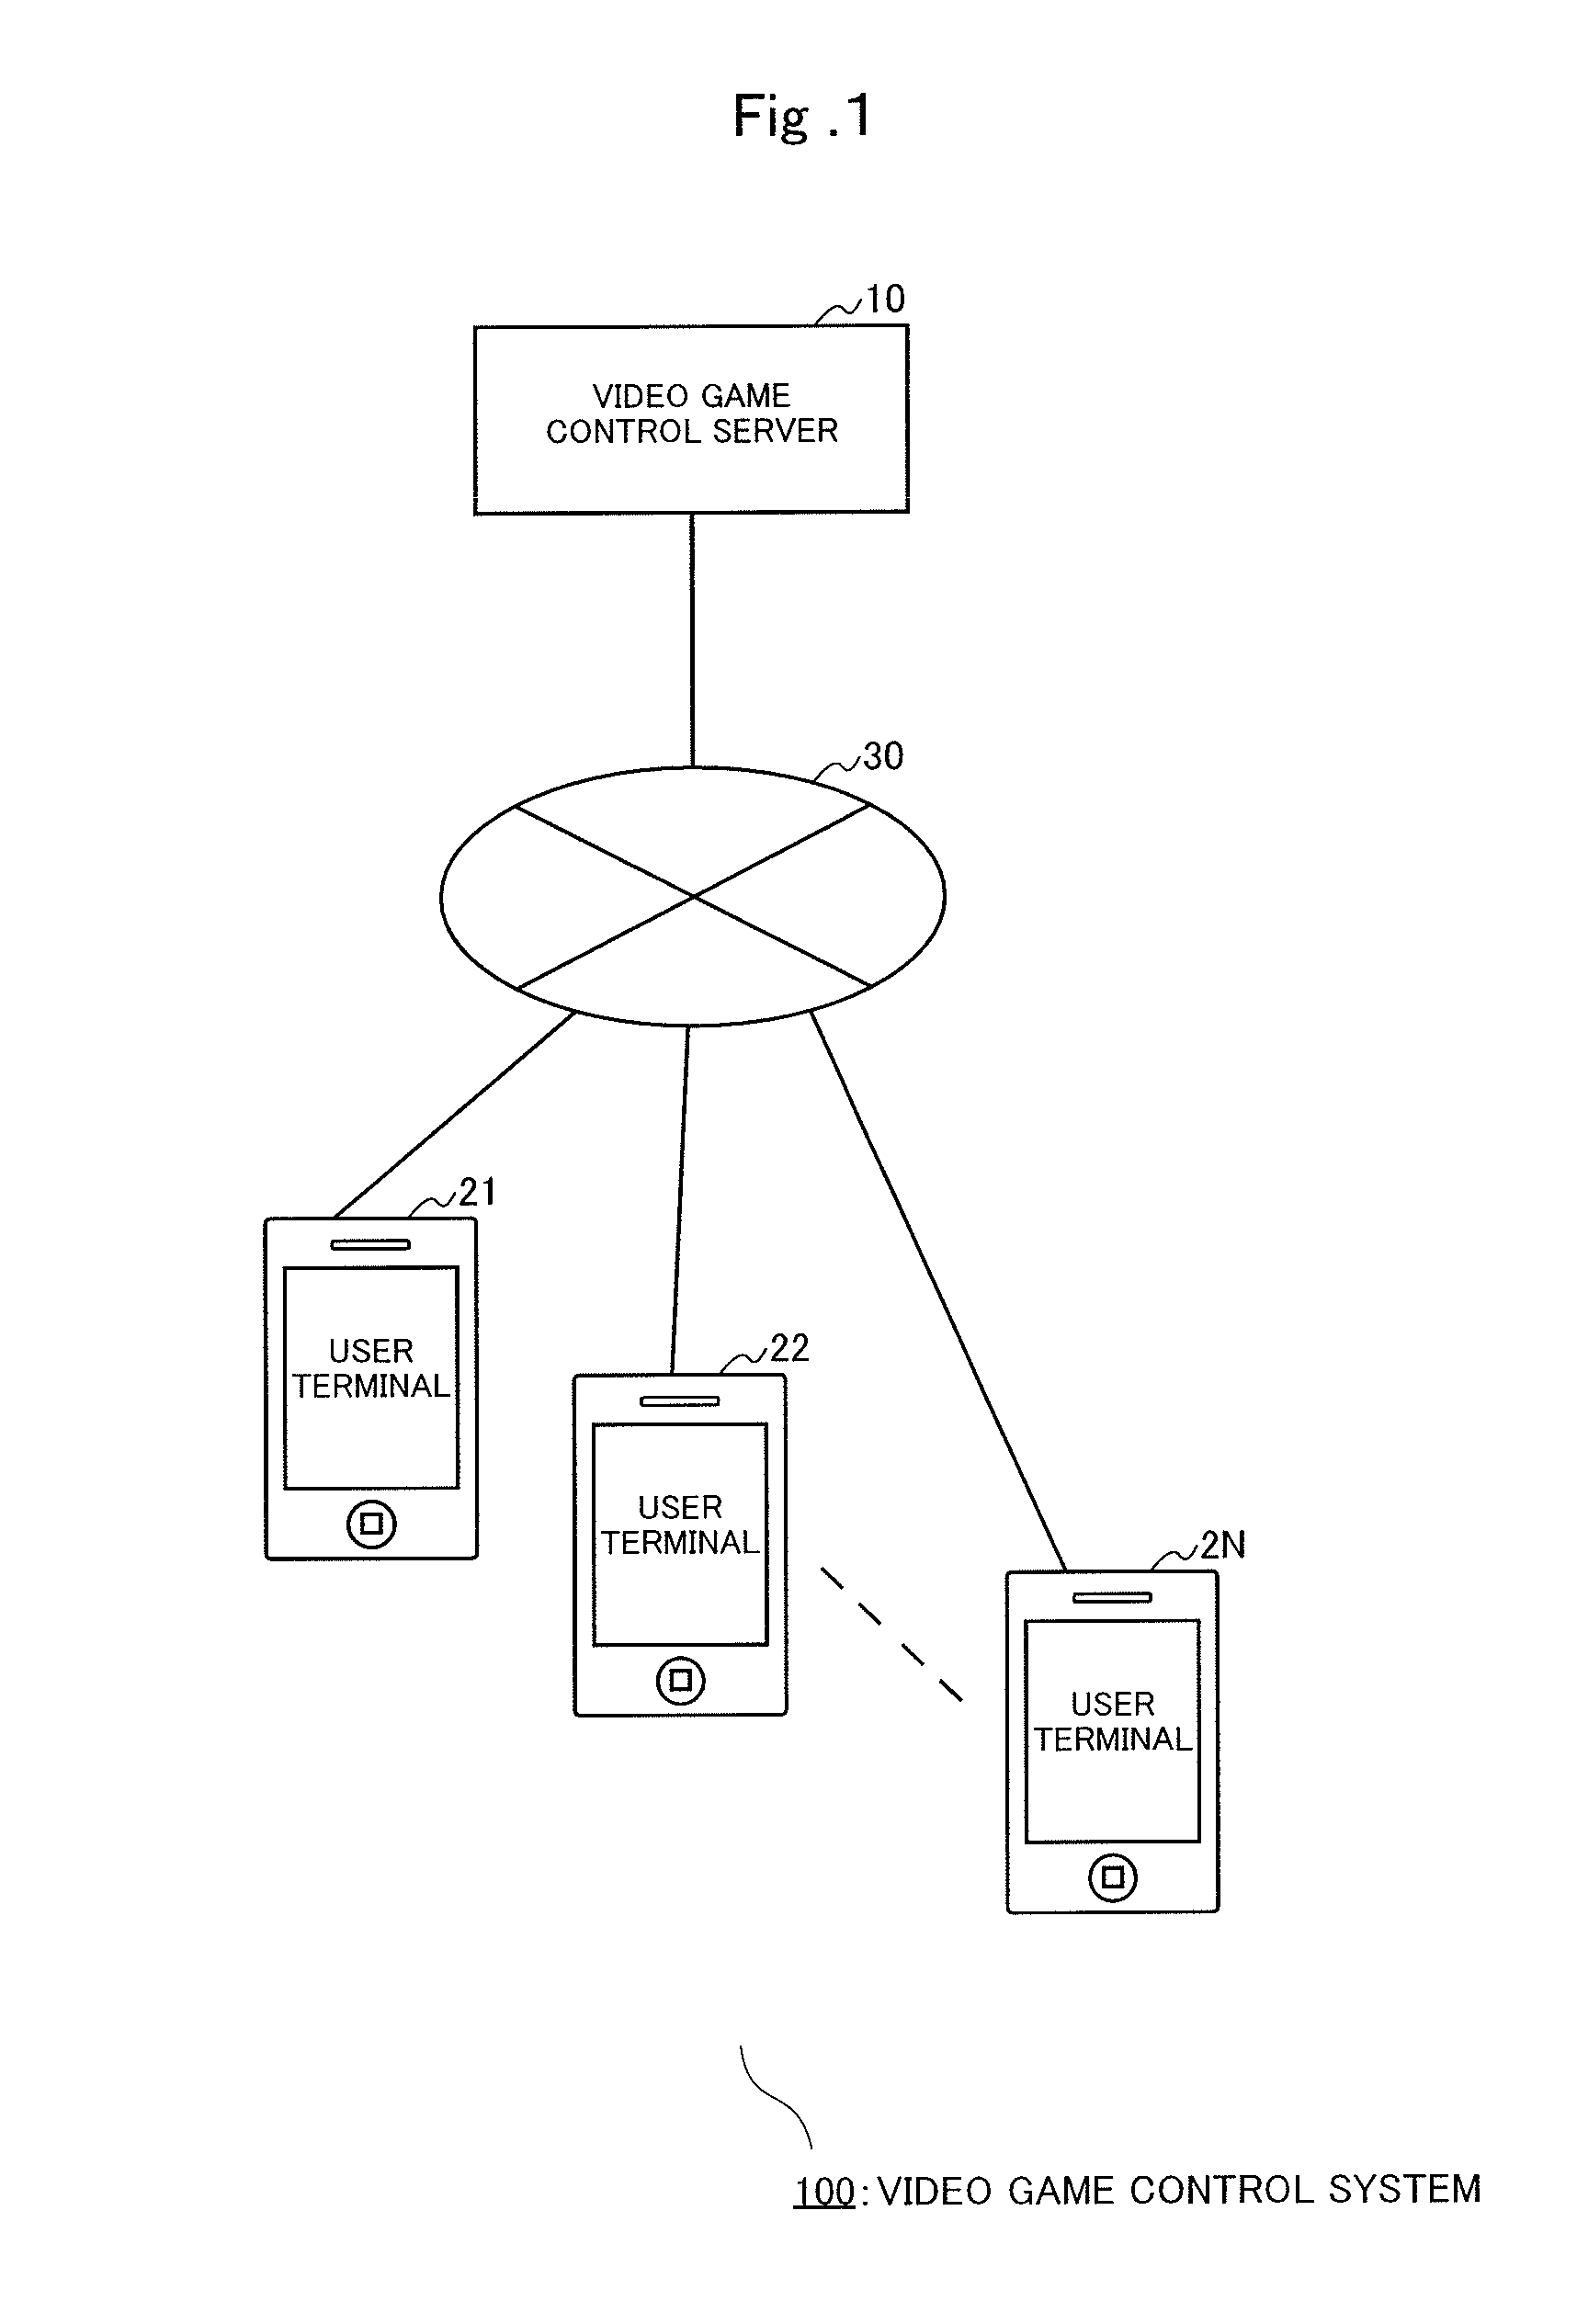 Video game control server, video game control apparatus, and video game control program product